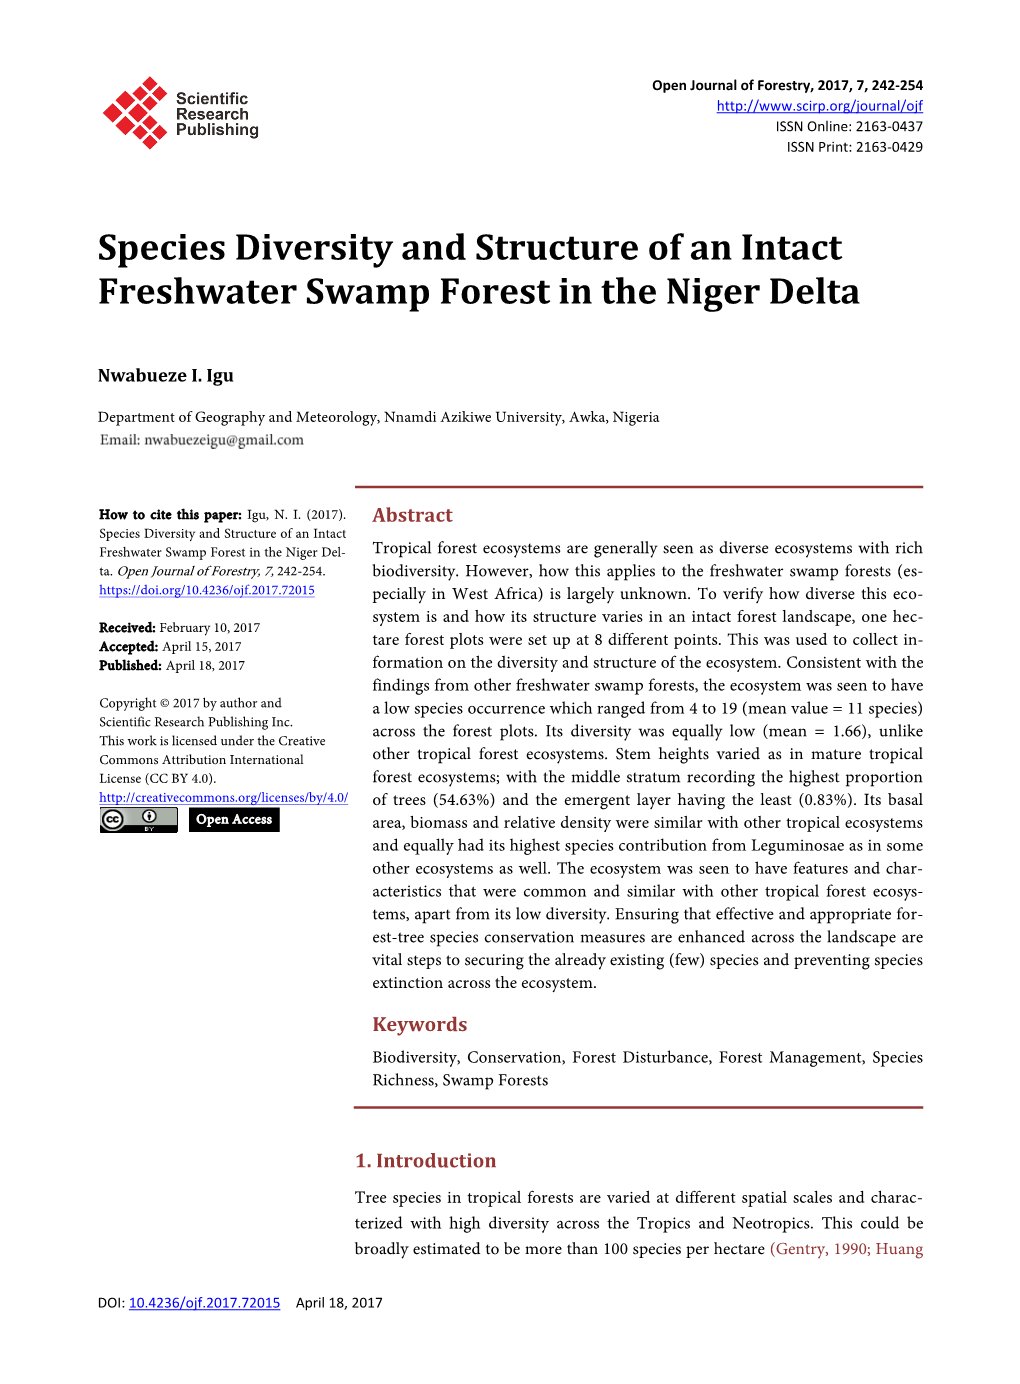 Species Diversity and Structure of an Intact Freshwater Swamp Forest in the Niger Delta